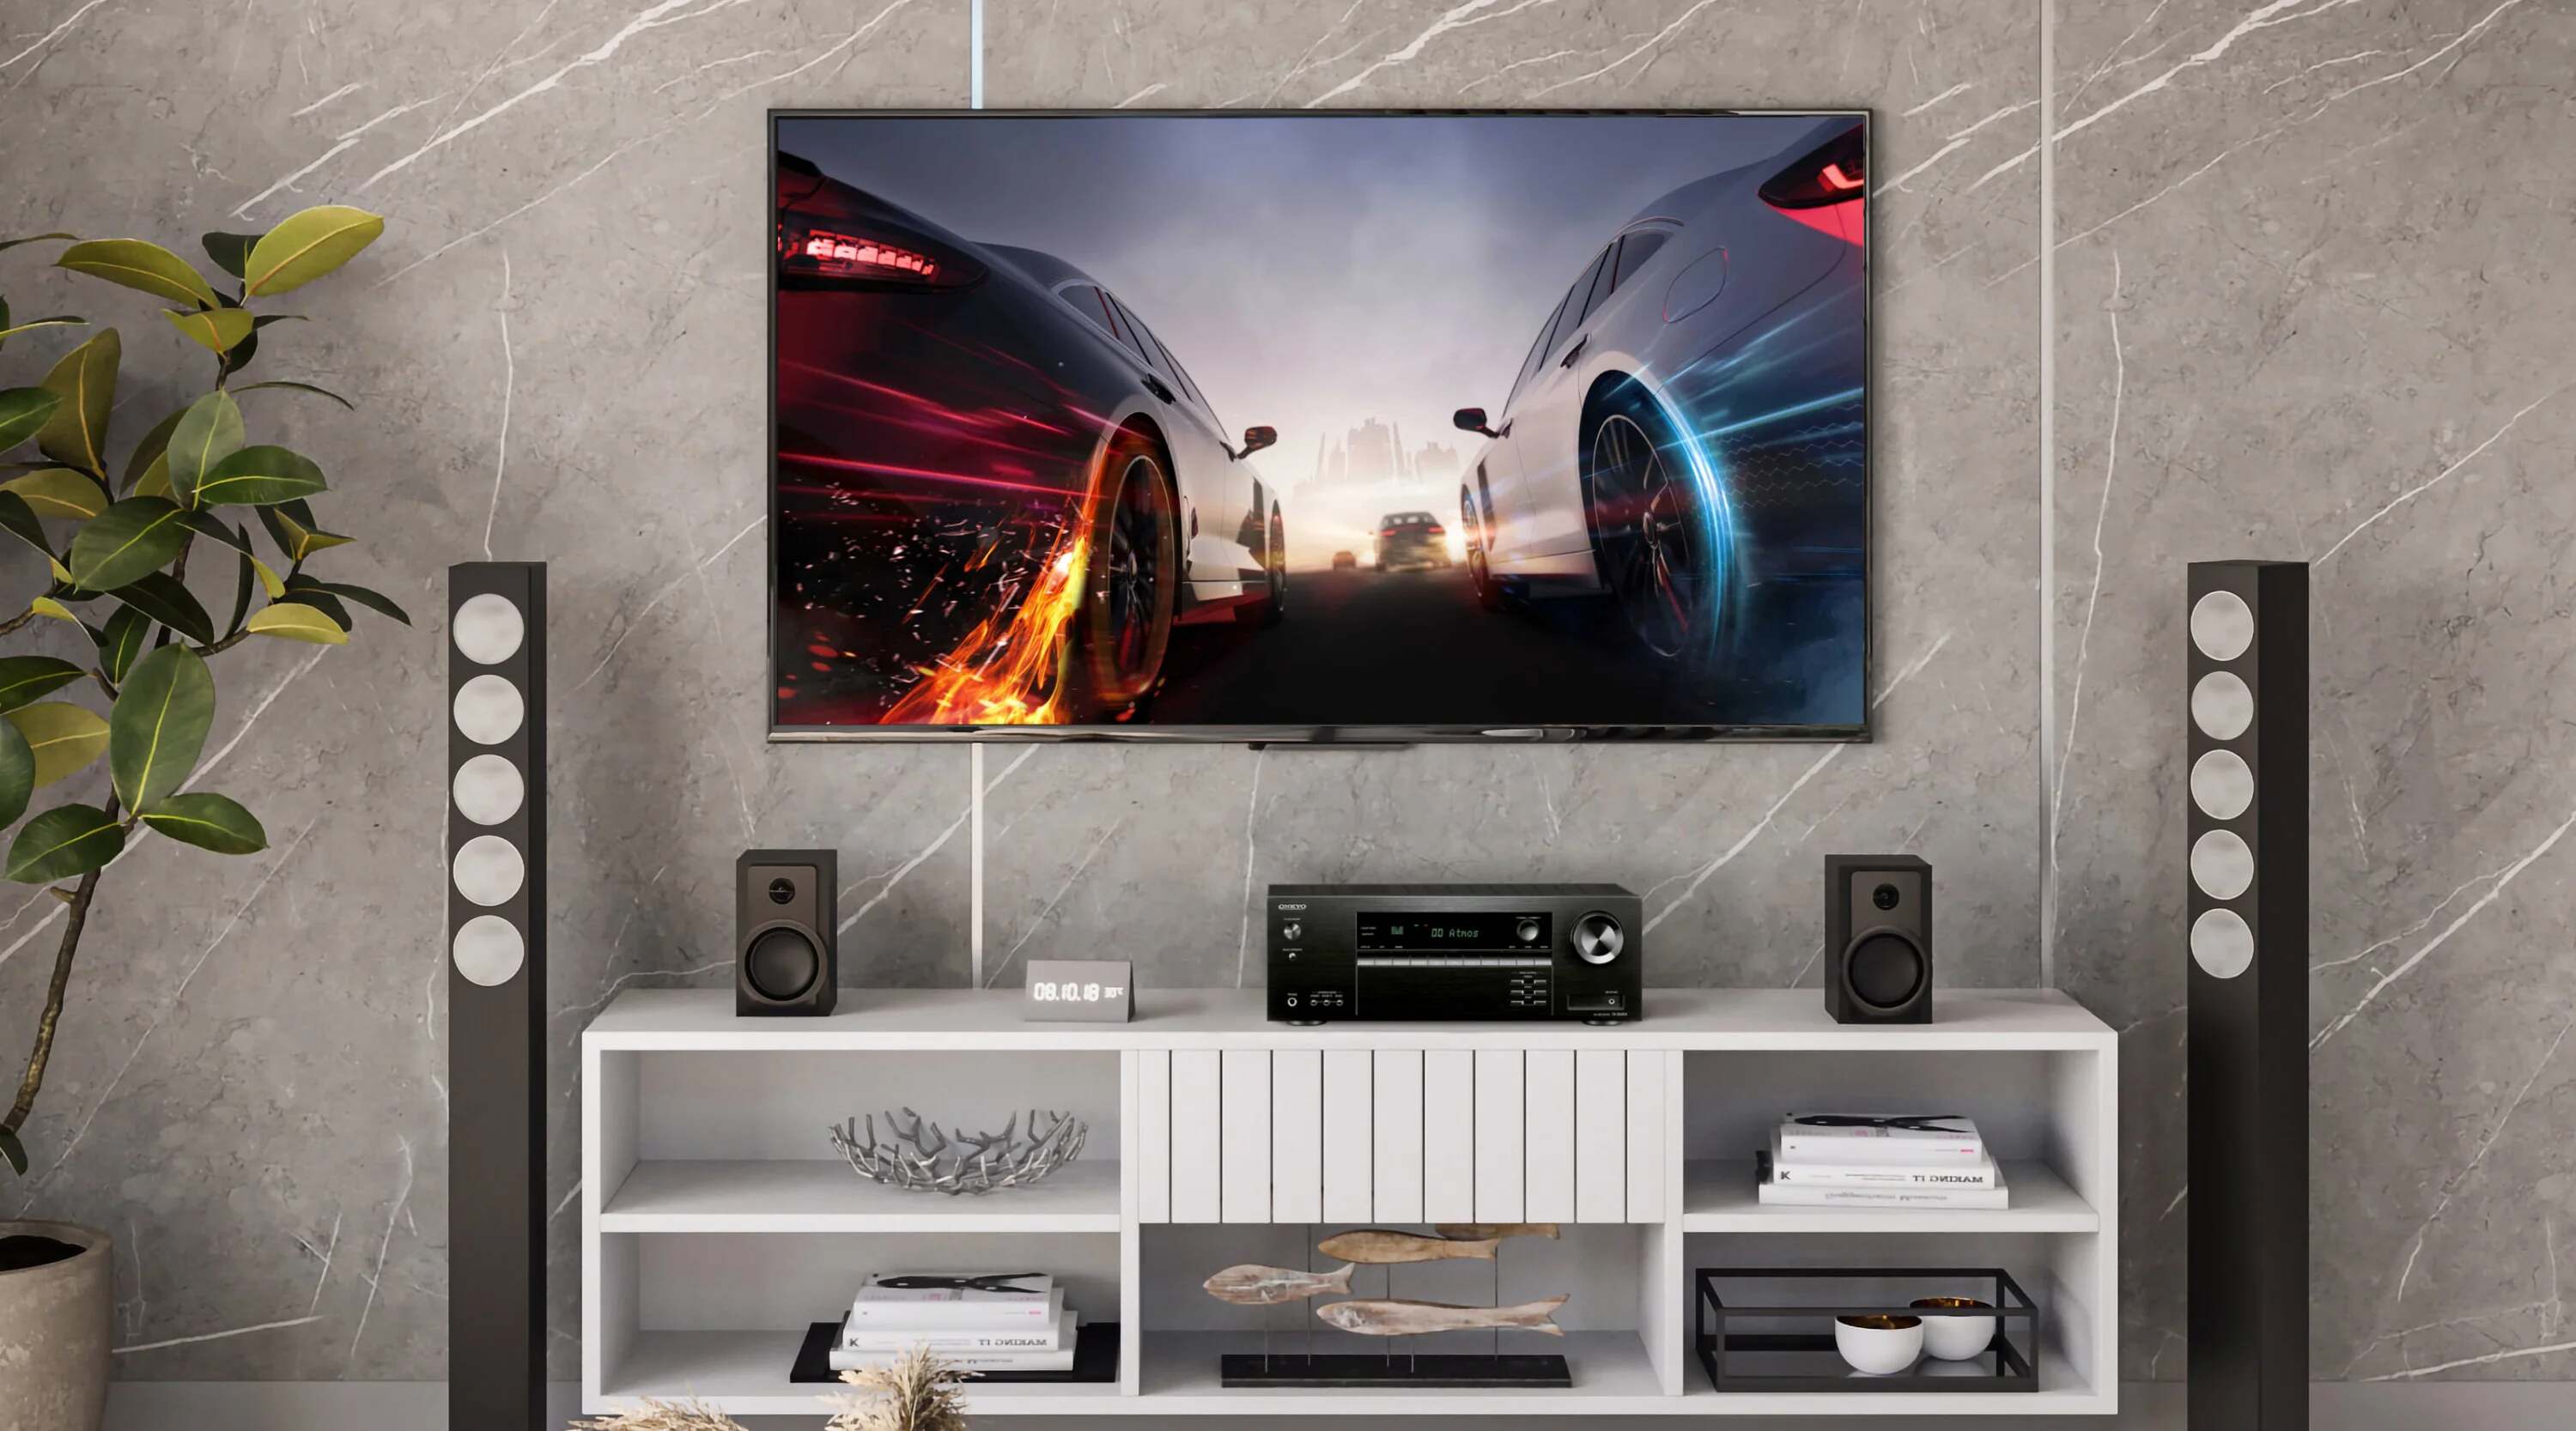 How To Install An Onkyo Home Cinema Surround Sound System